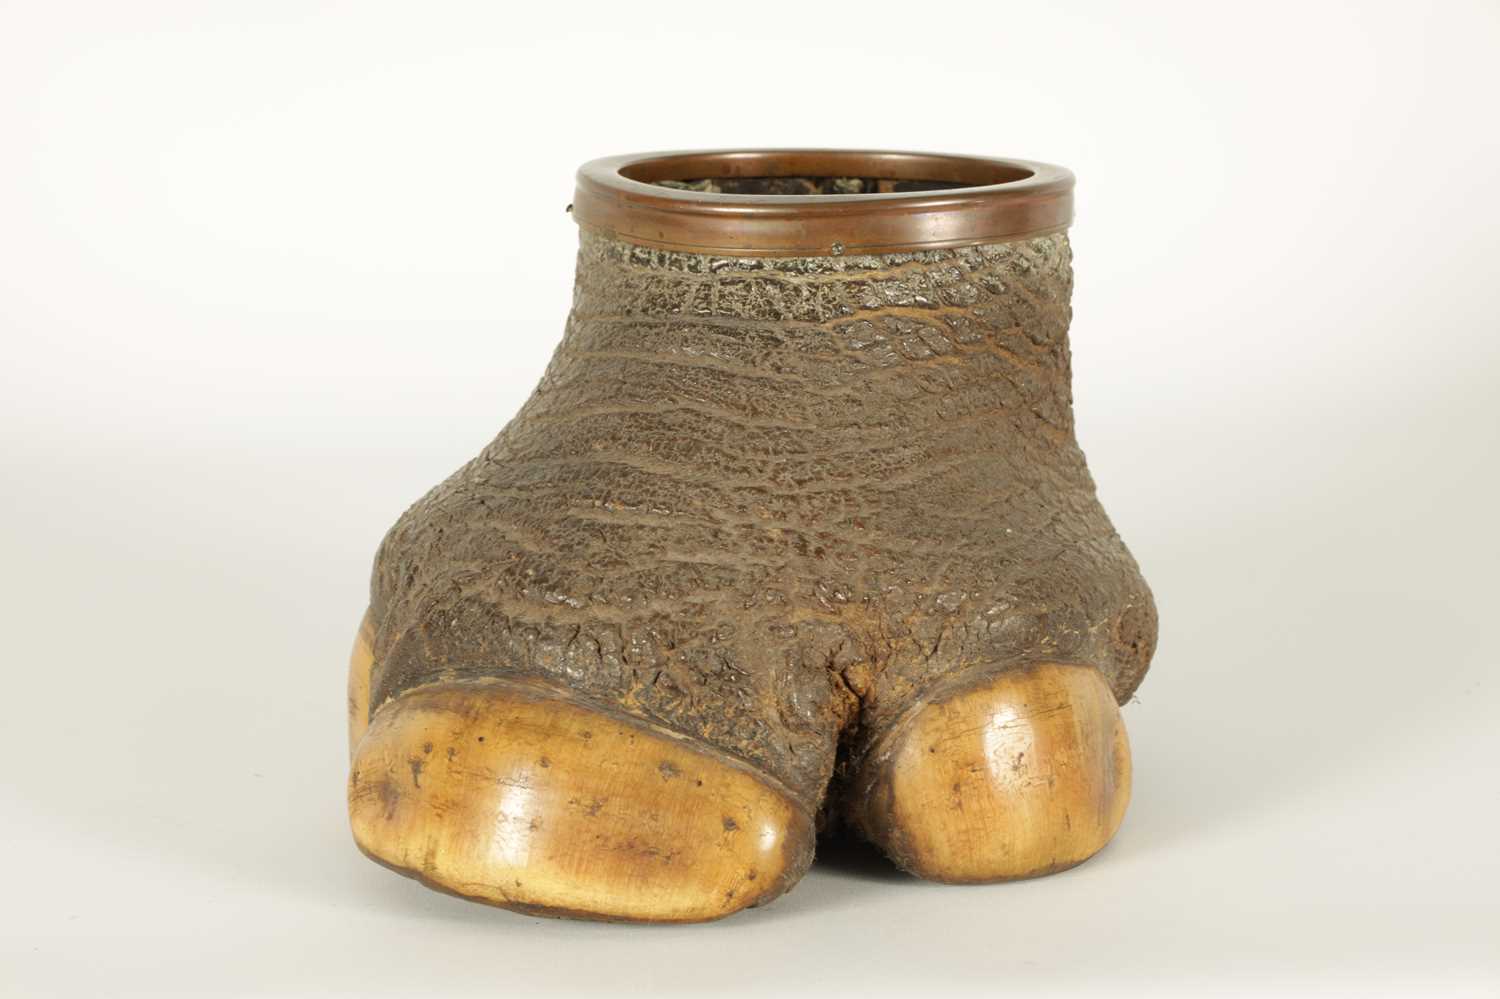 A SMALL LATE 19TH CENTURY TAXIDERMY RHINO FOOT - Image 2 of 8